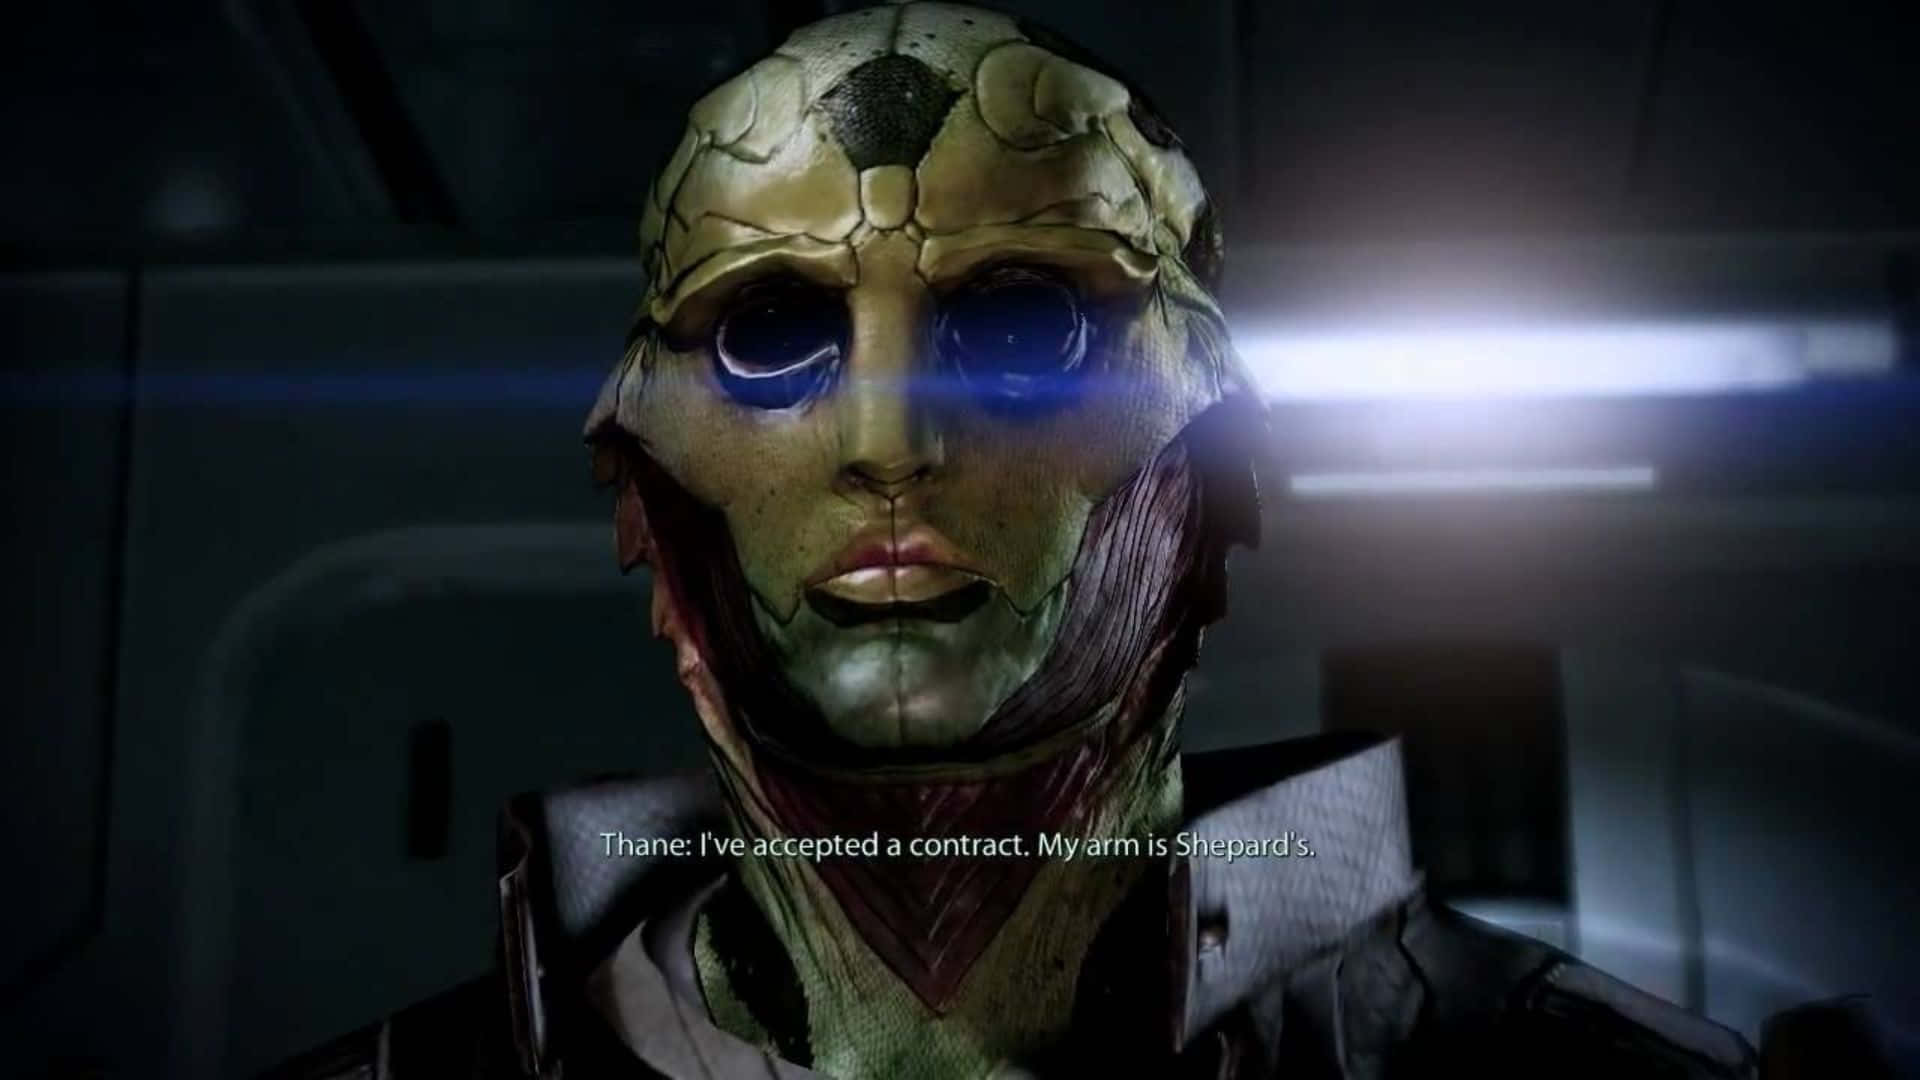 Thane Krios, the galaxy's deadliest assassin, in action. Wallpaper